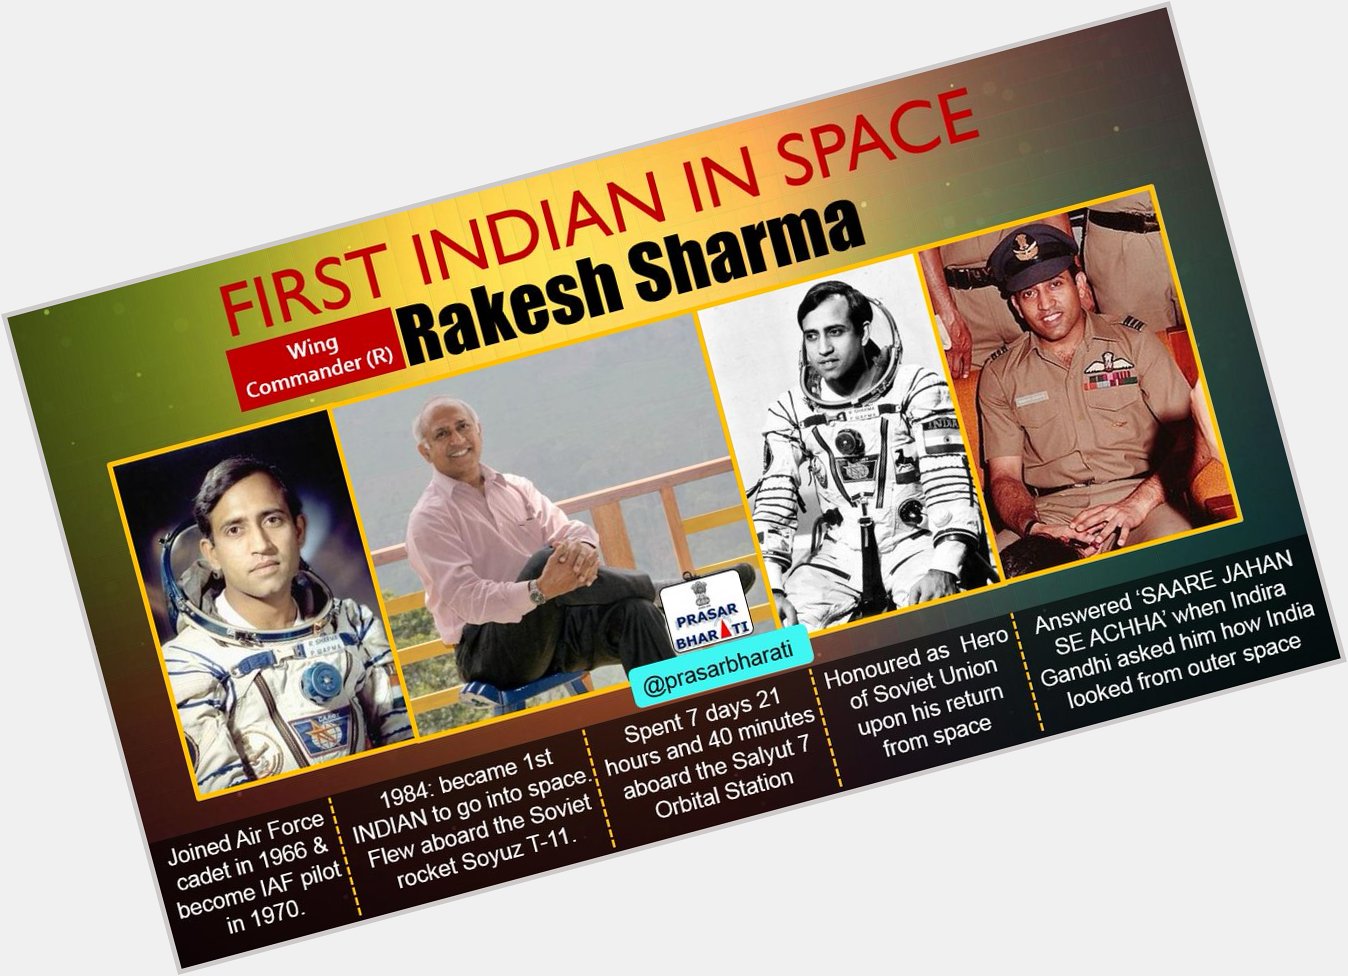 Happy Birthday Rakesh Sharma !!
The First Indian to travel in Space, Ashok Chakra turns 68 today. 